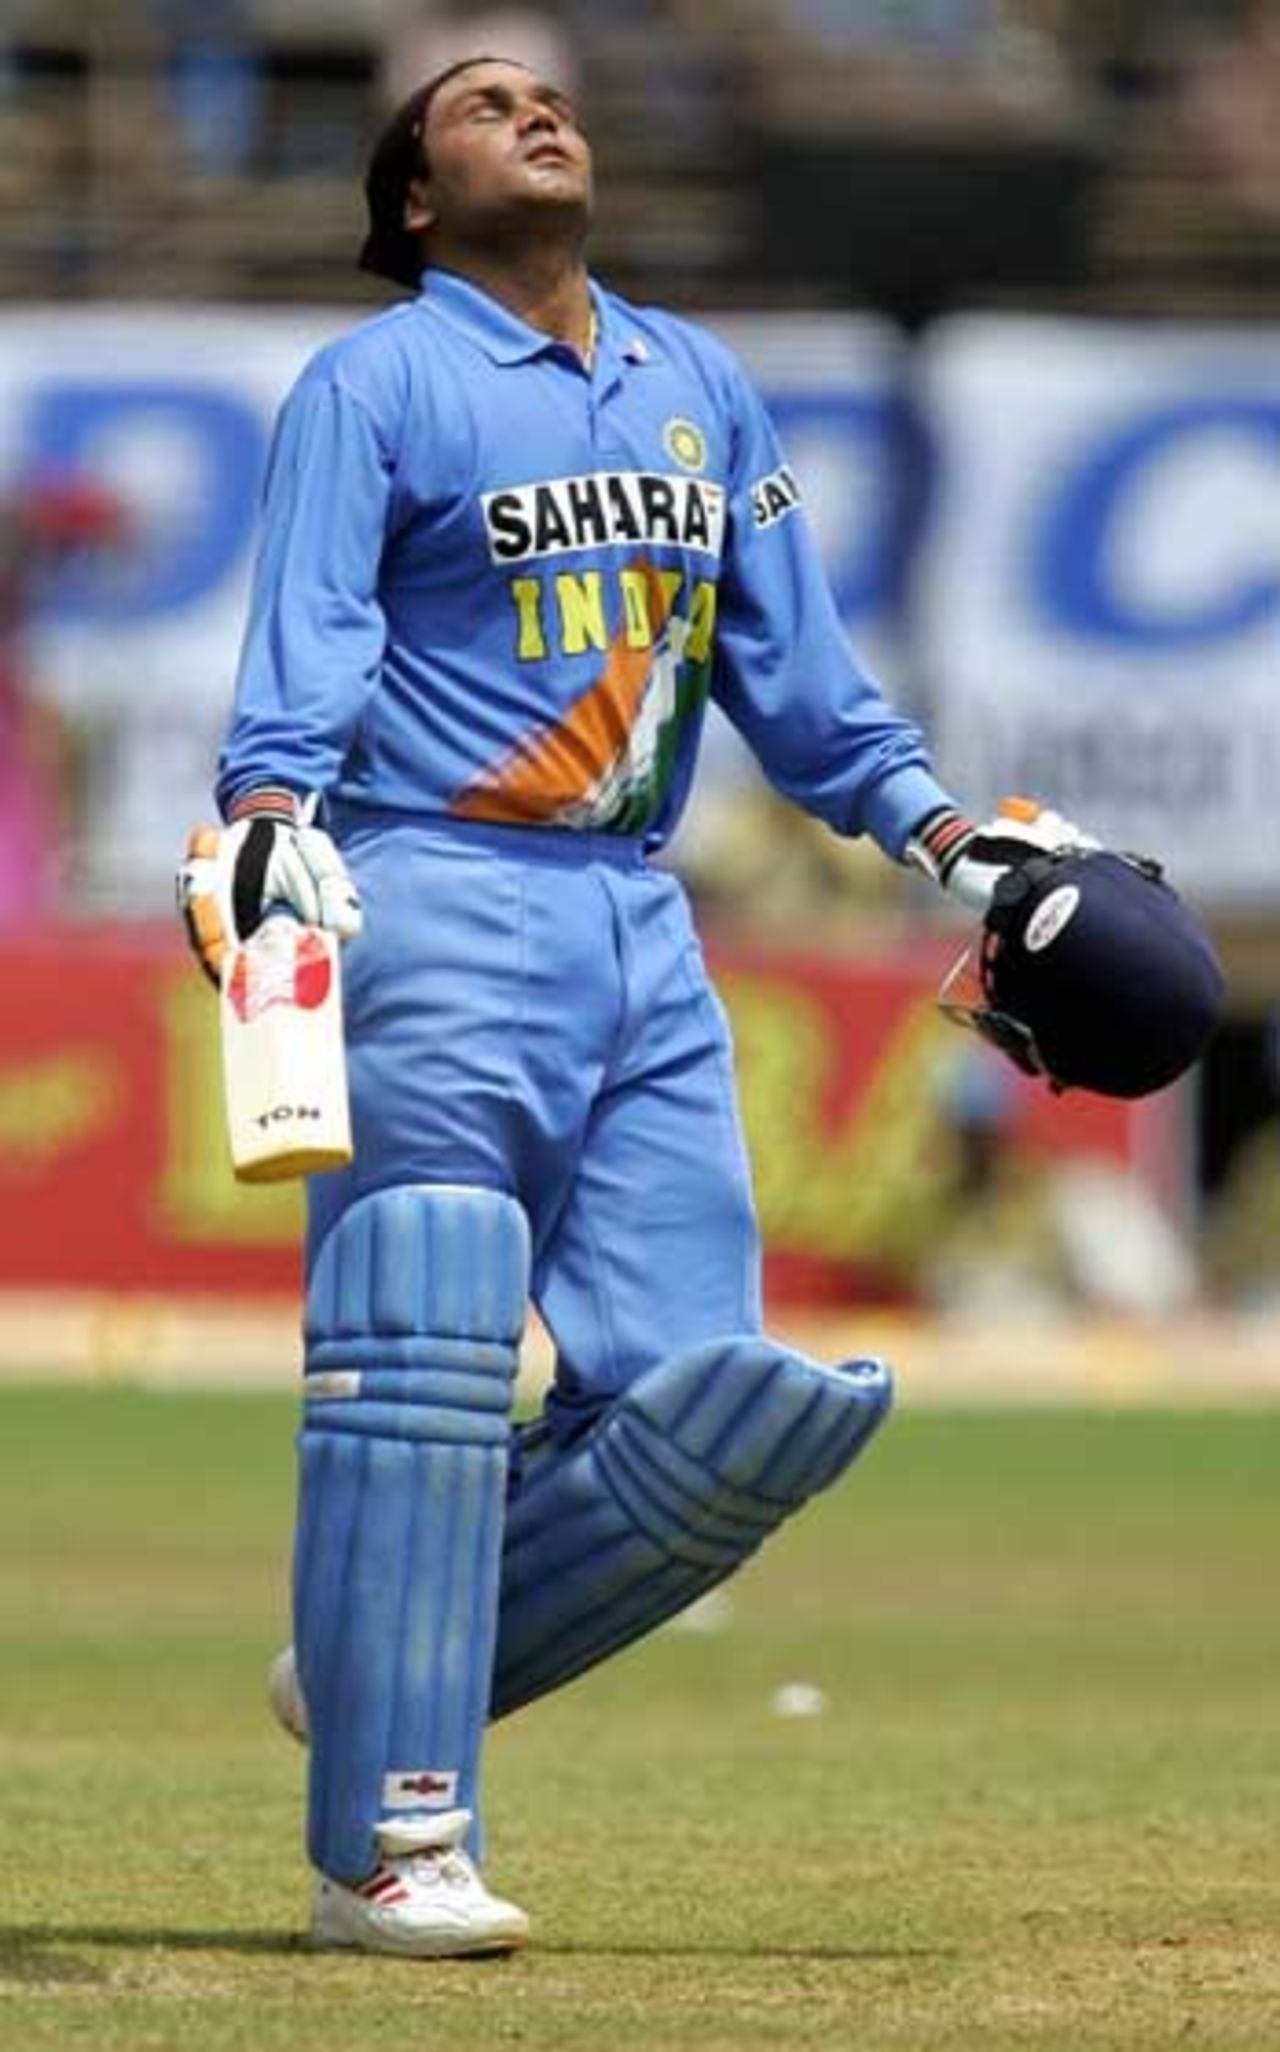 Virender Sehwag scored a magnificent century in debilitating conditions, India v Pakistan, 1st ODI, Kochi, April 2, 2005